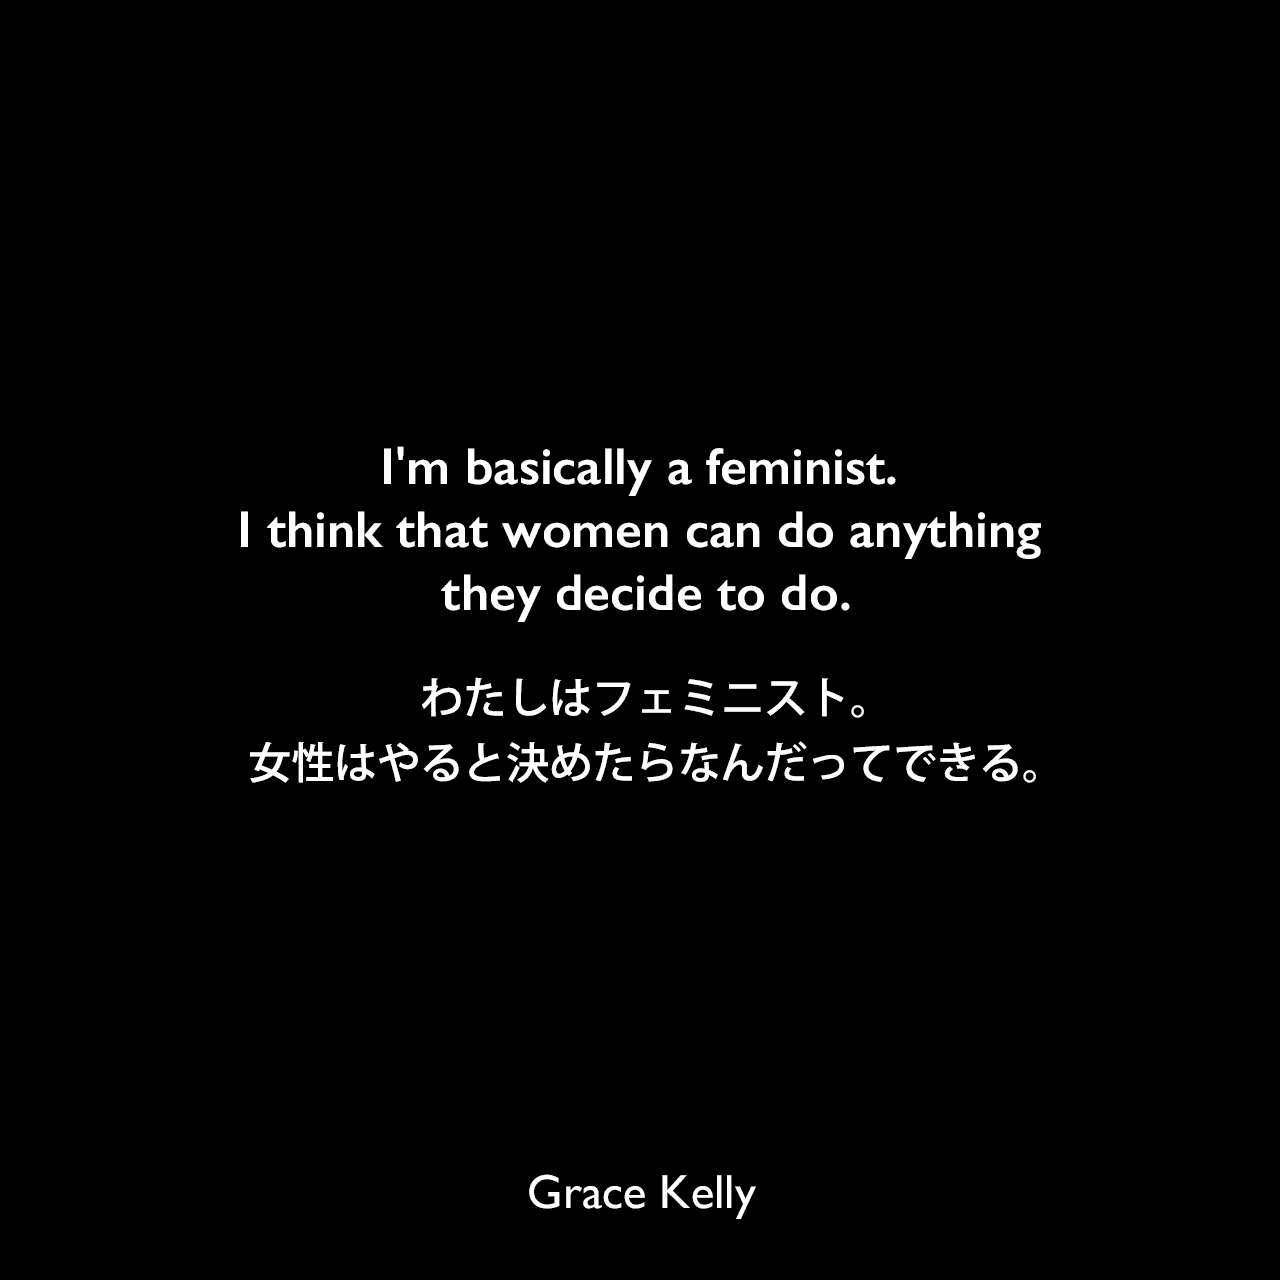 I'm basically a feminist. I think that women can do anything they decide to do.わたしはフェミニスト。女性はやると決めたらなんだってできる。Grace Kelly